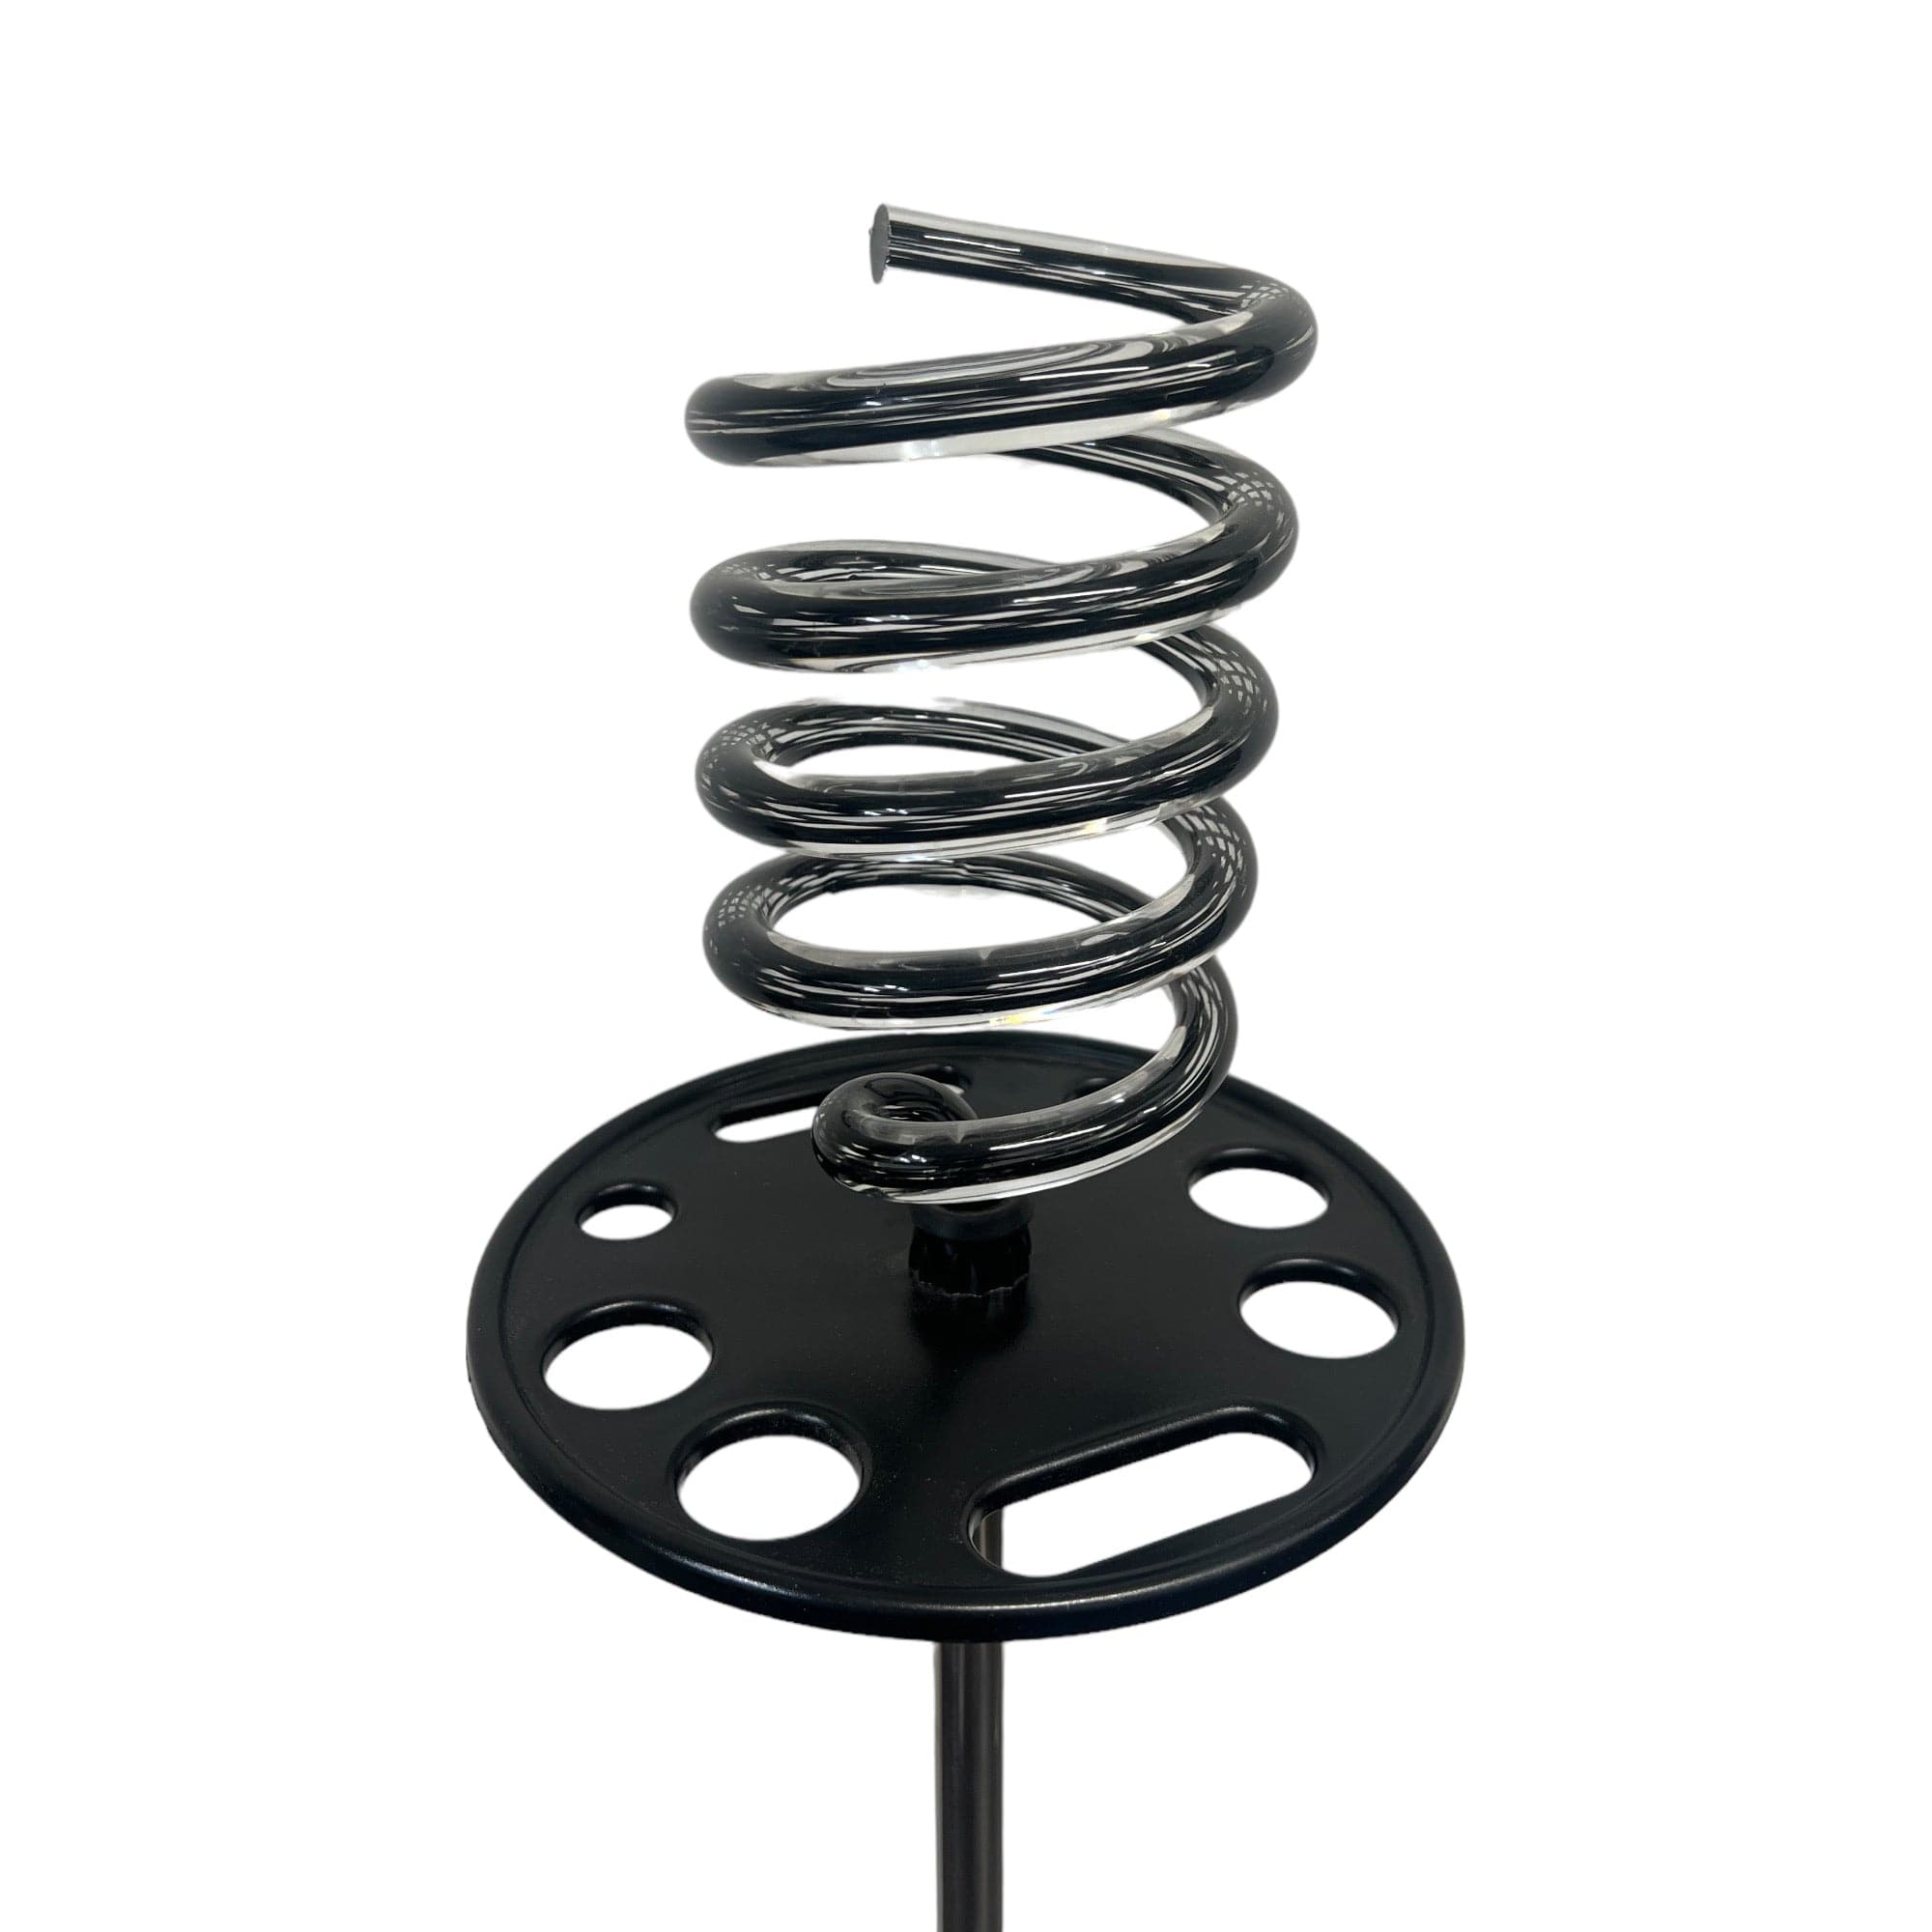 Eson - Hair Dryer Holder Stand Acrylic Spiral with Tray